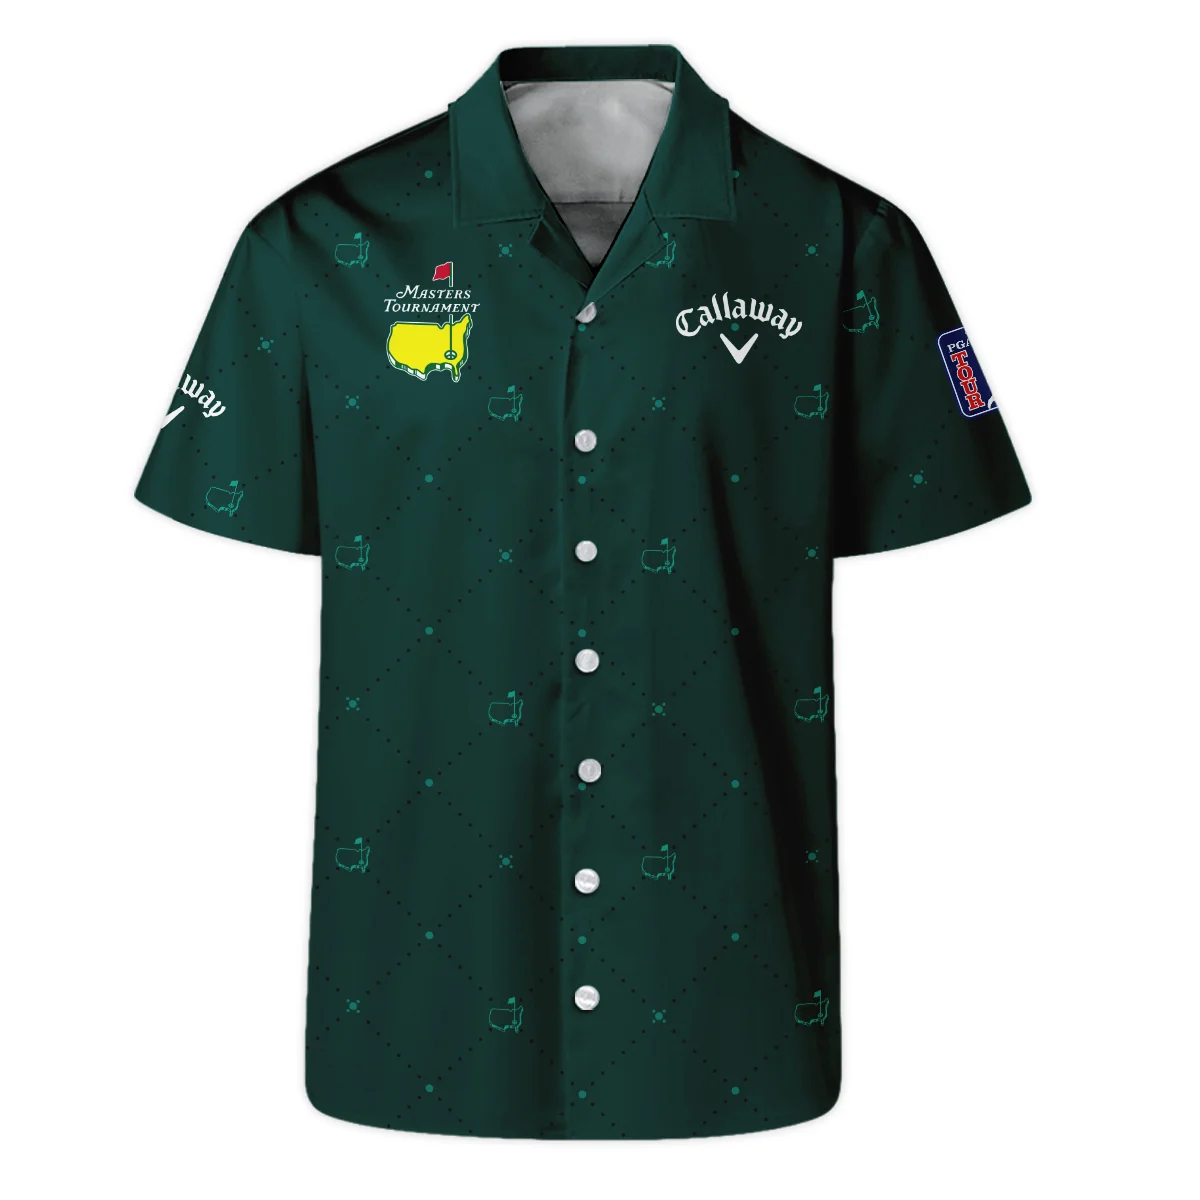 Dark Green Pattern In Retro Style With Logo Masters Tournament Callaway Vneck Long Polo Shirt Style Classic Long Polo Shirt For Men